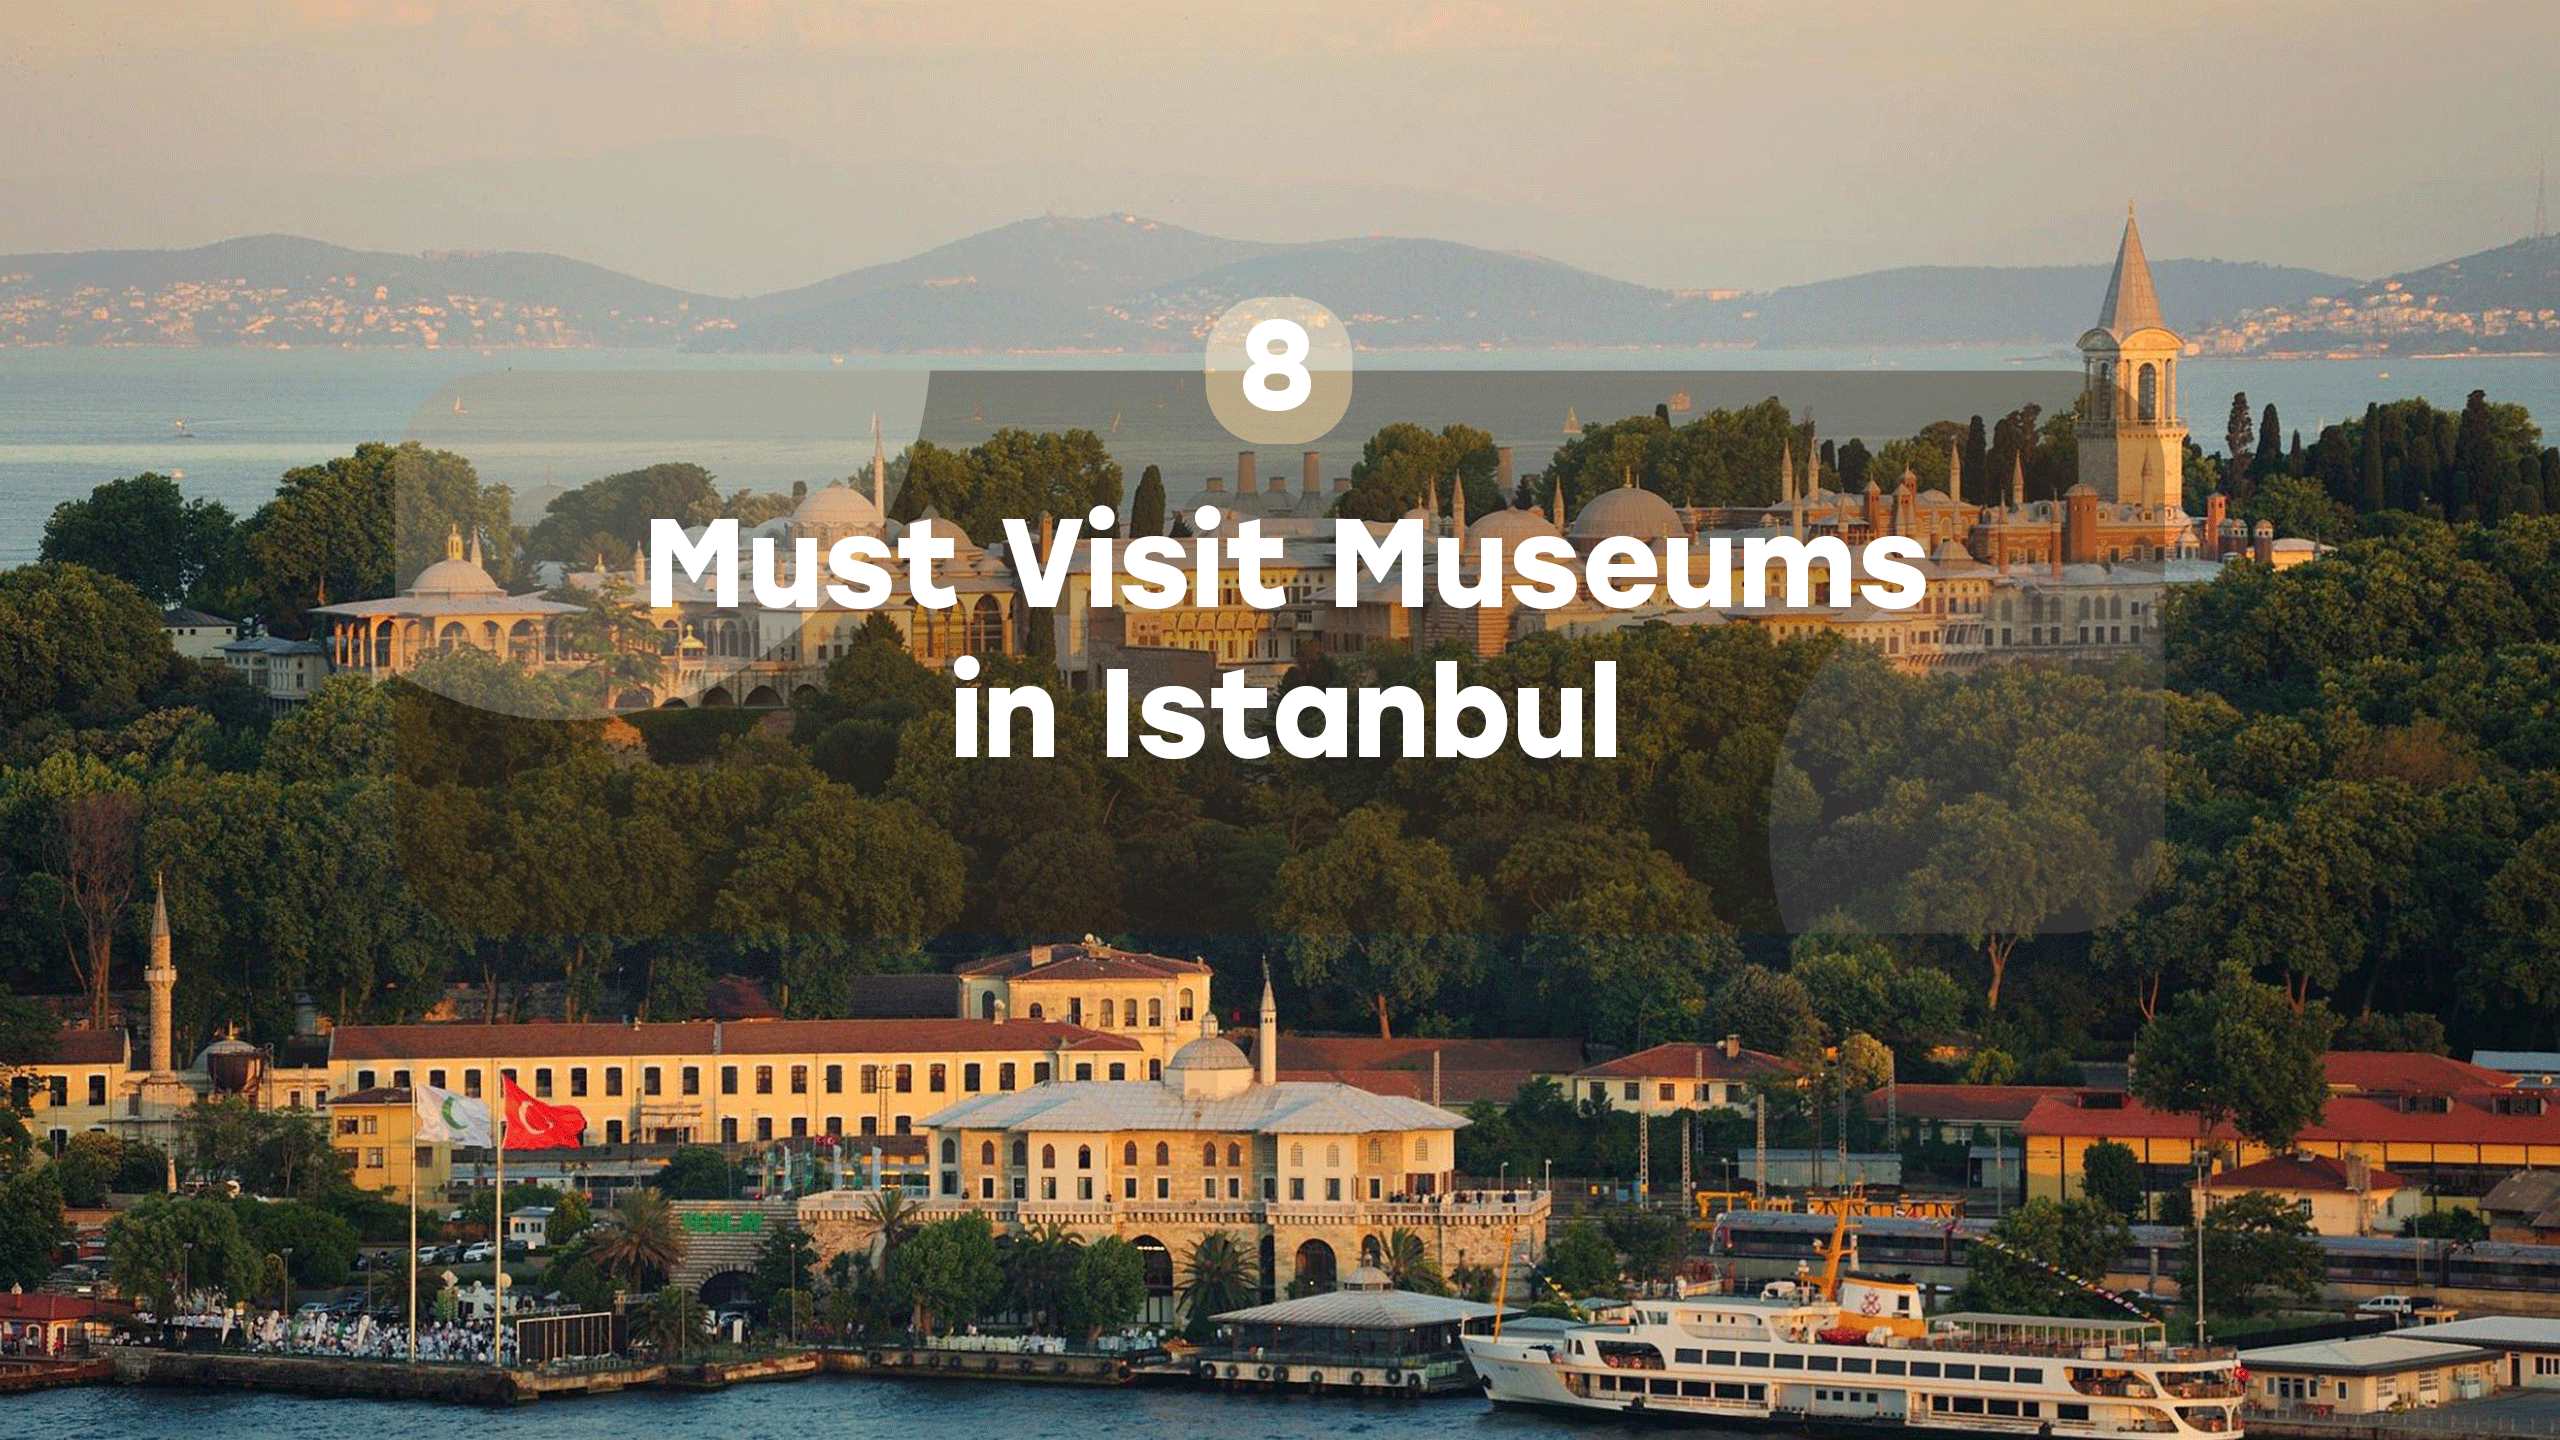 8 Must Visit Museums in Istanbul Everytours